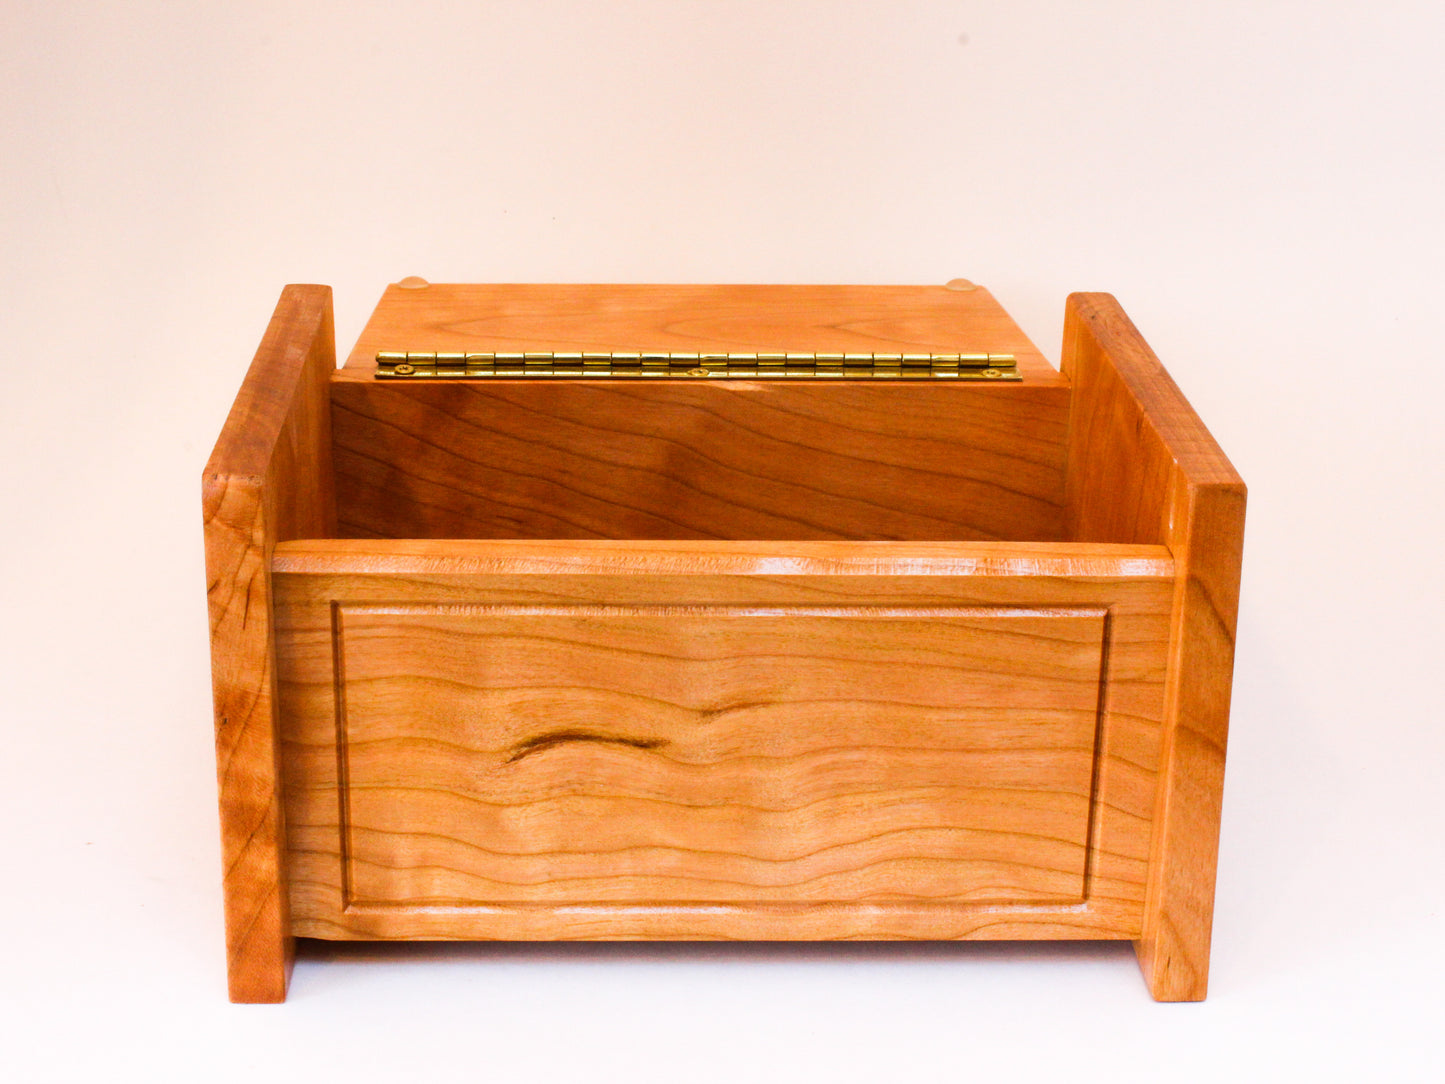 Front view of wooden keepsake box with hinged lid open 